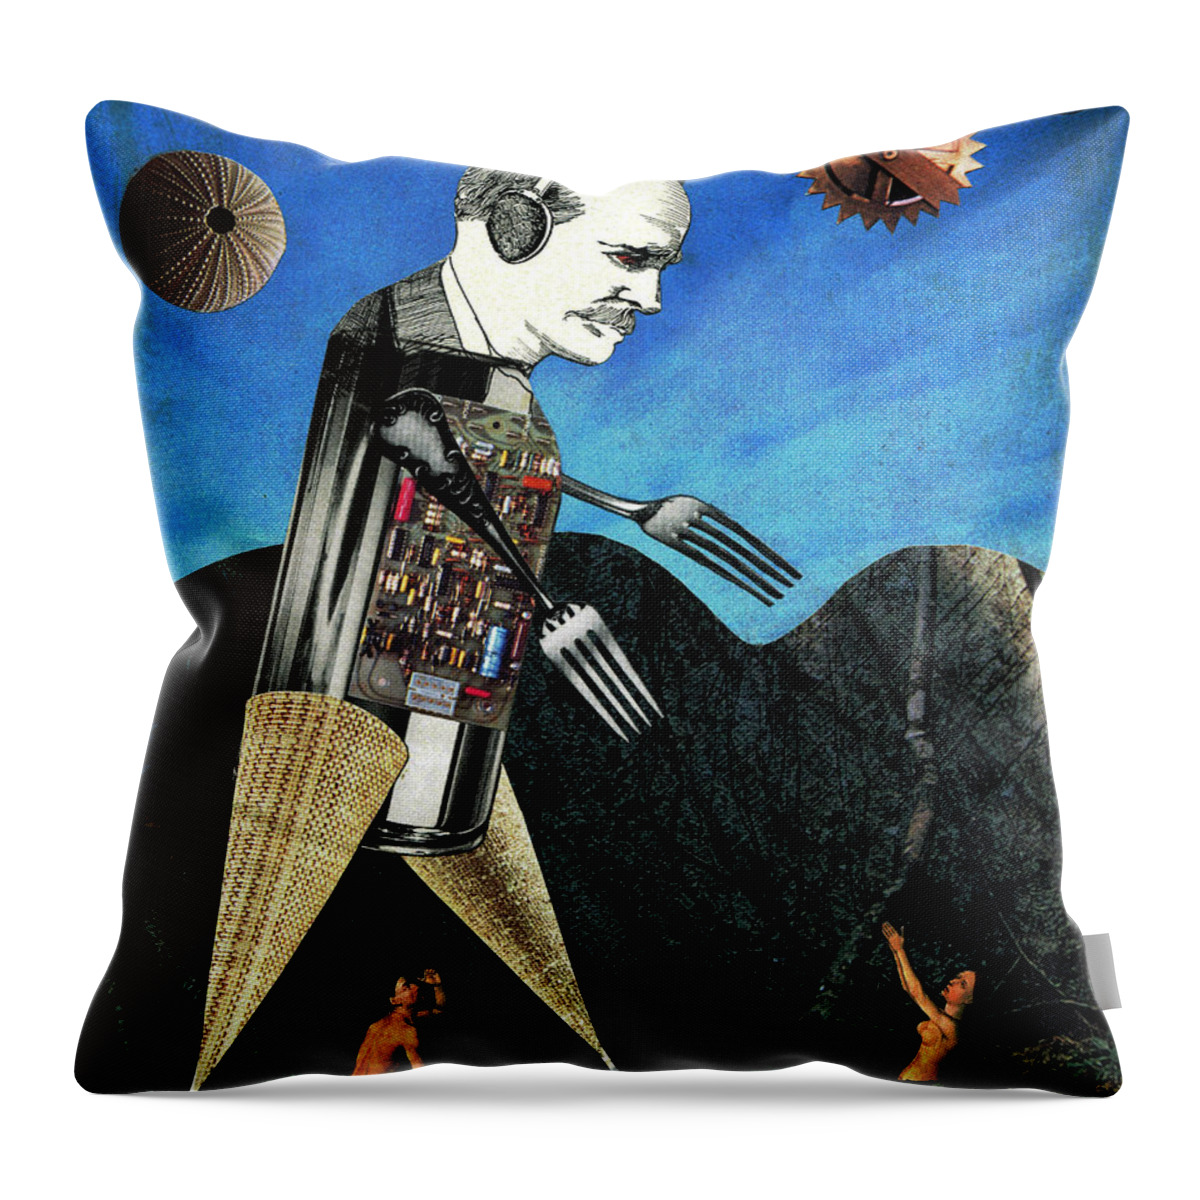 Collage Throw Pillow featuring the photograph Gotcha by Linda Apple